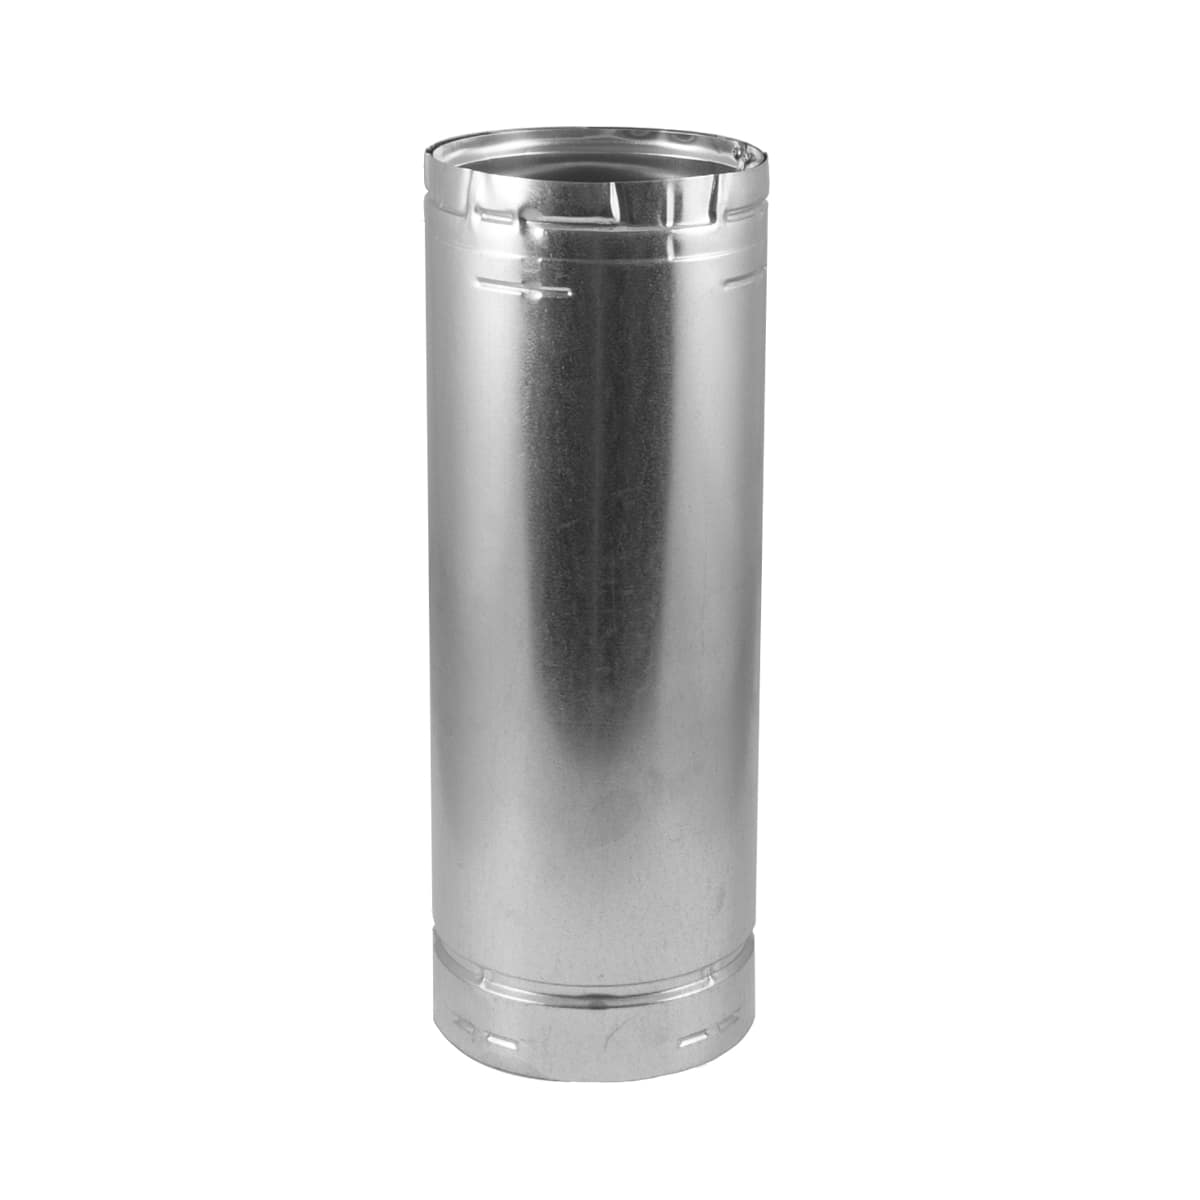 AMERIVENT 3E24/PW-124121 3" X 24" B-VENT DOUBLE WALL GAS VENT CONNECTOR PIPE 